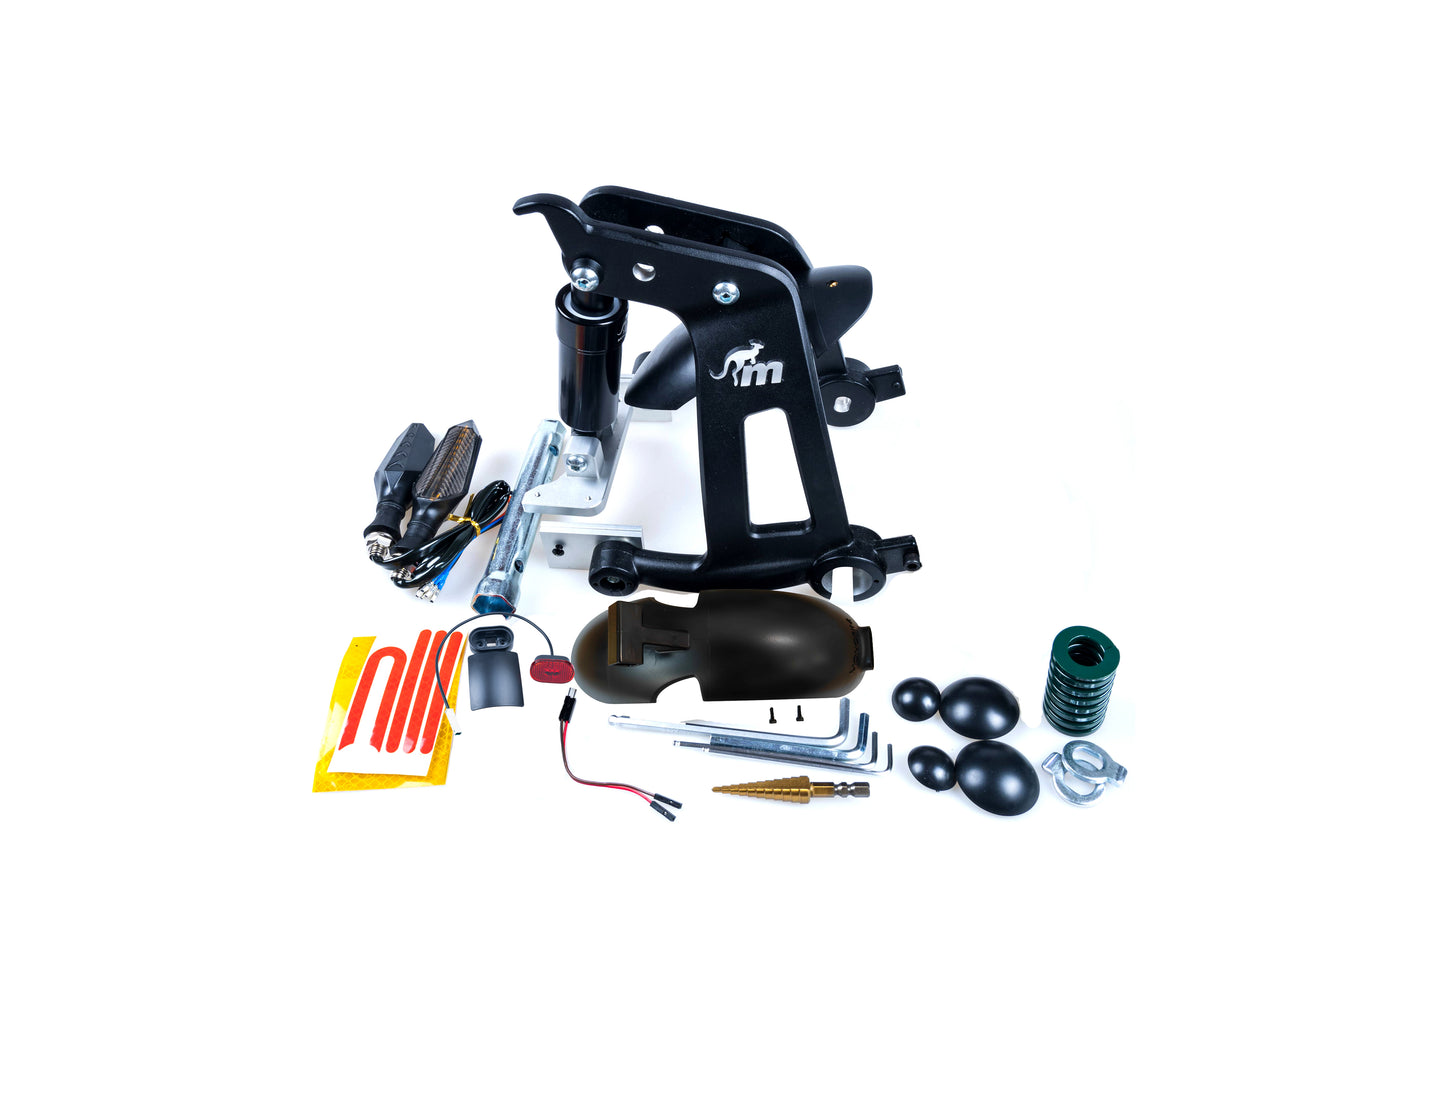 Monorim MKR1 Rear Suspension for Gyroor X8 Scooter Includ the Turn Signal Specially for 8.5/10inch Parts Accessories